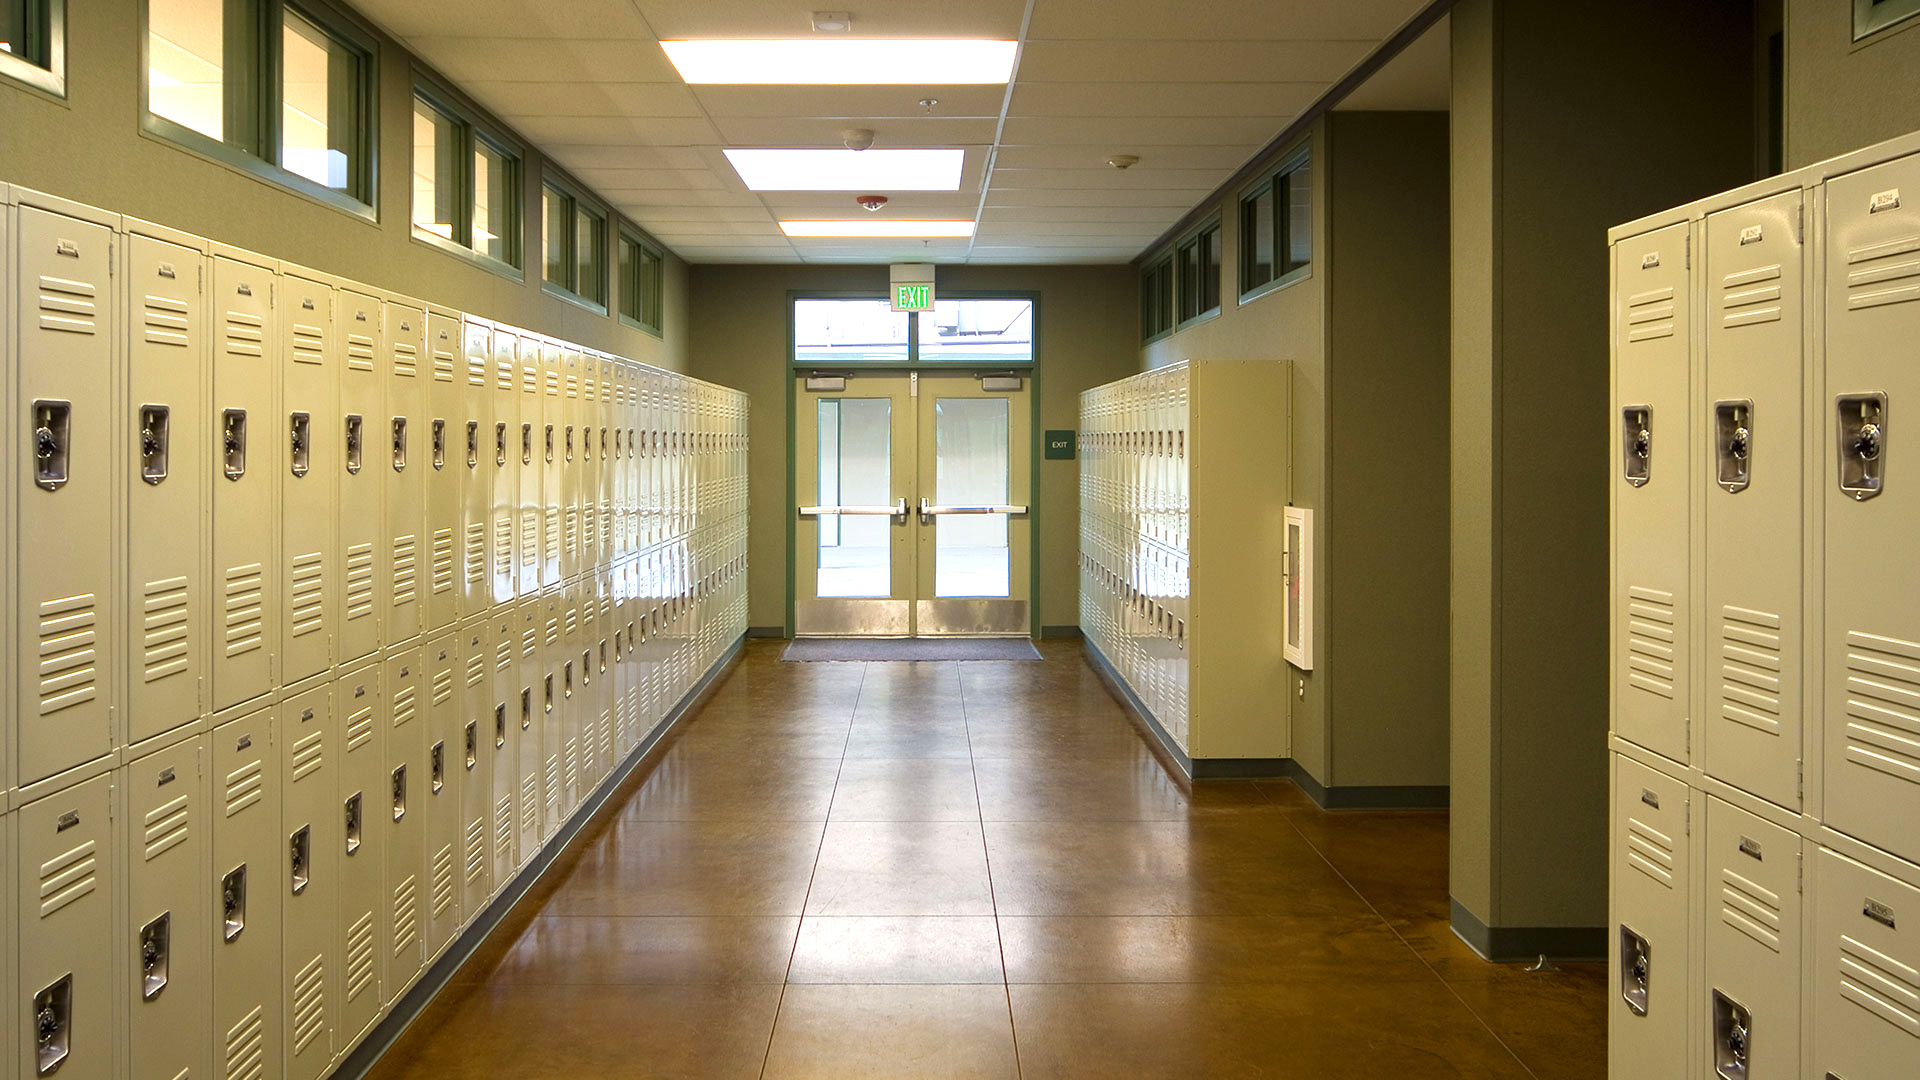 Hallway interior, with lockers flanking left and right. Brown floors below light green walls and ceilings.